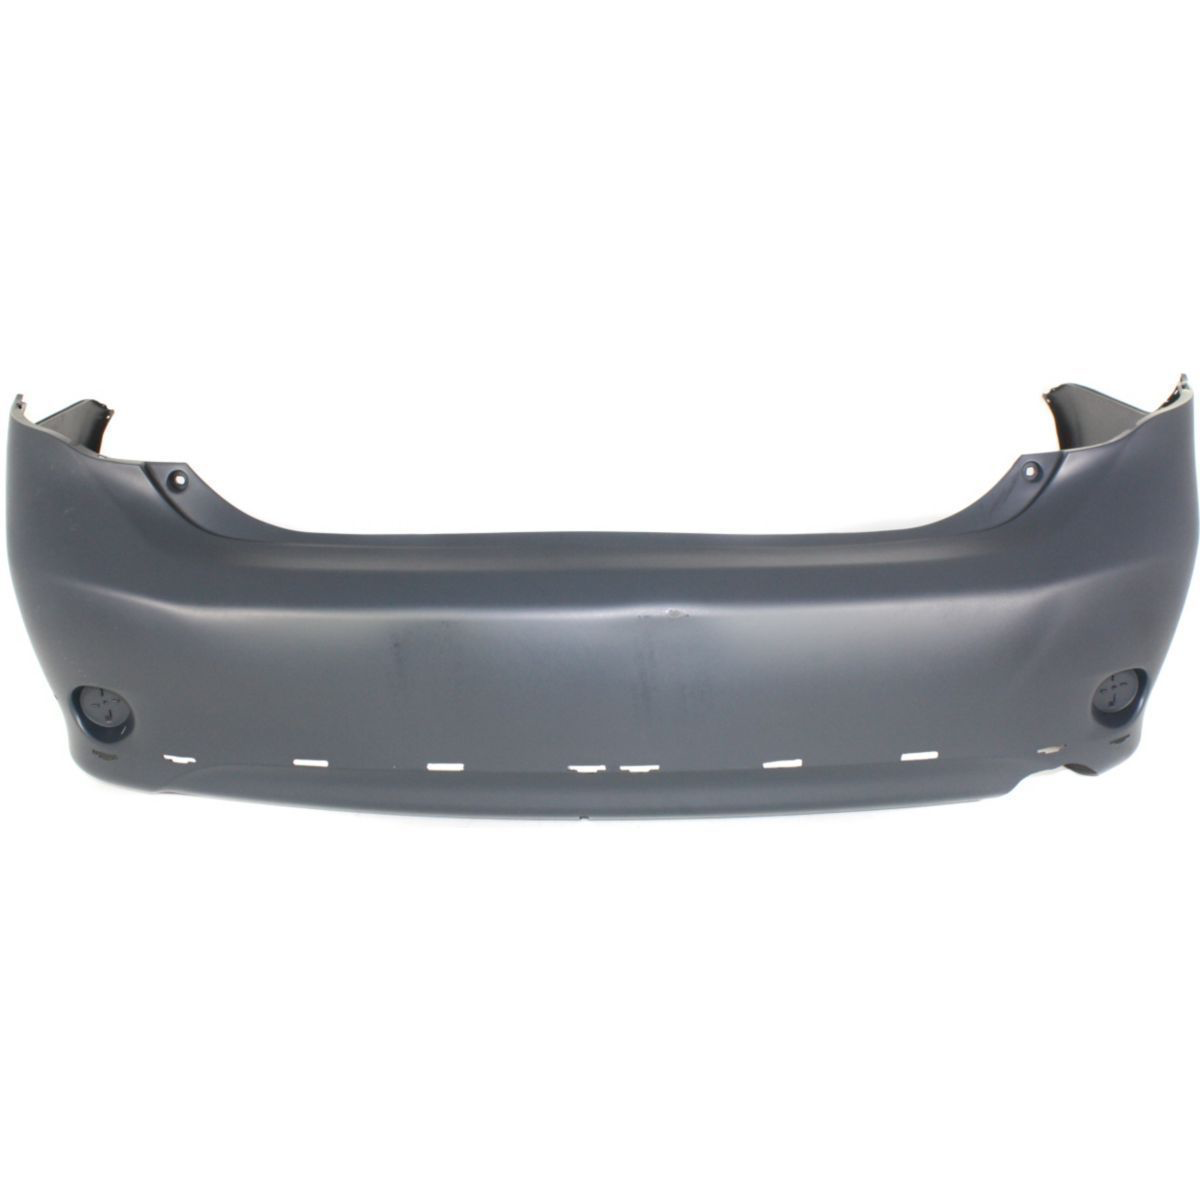 2009-2010 TOYOTA COROLLA Rear Bumper Cover S|XRS Painted to Match